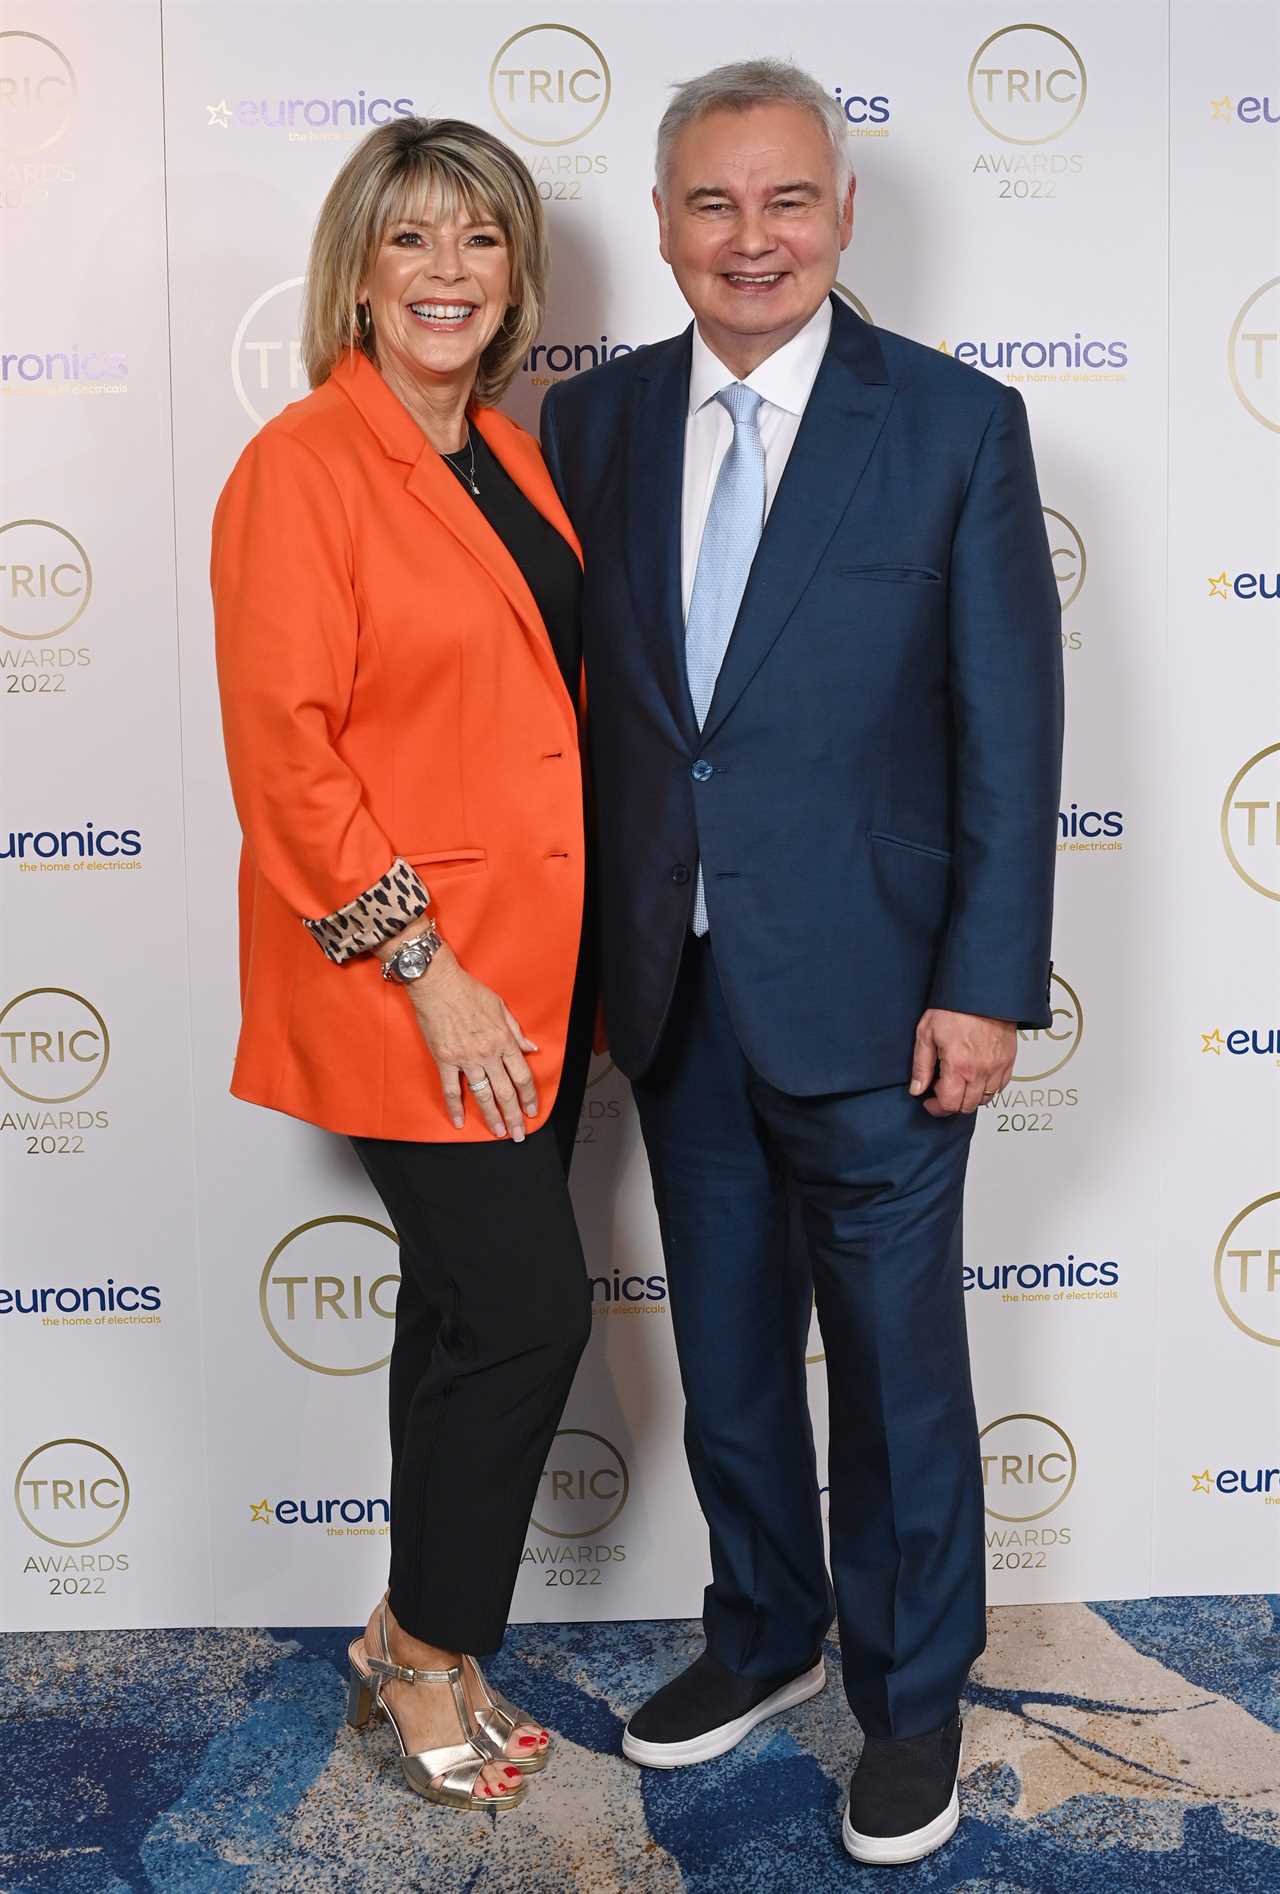 Eamonn Holmes and Ruth Langsford to Divorce After Drifting Apart Due to Work Commitments